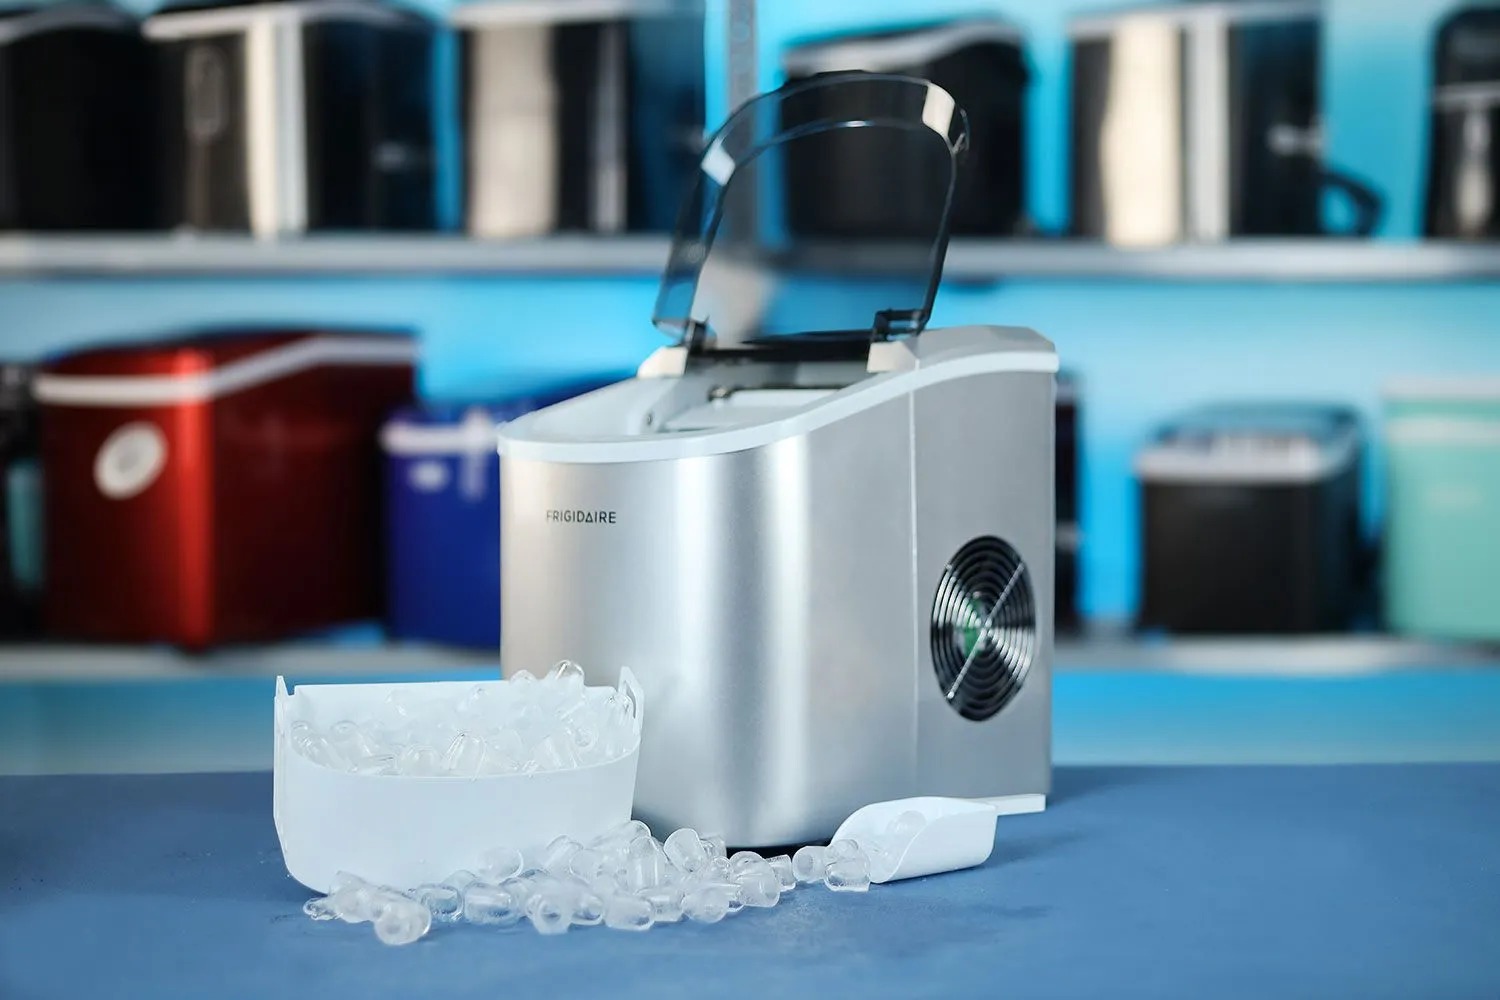 How To Clean Frigidaire Ice Maker